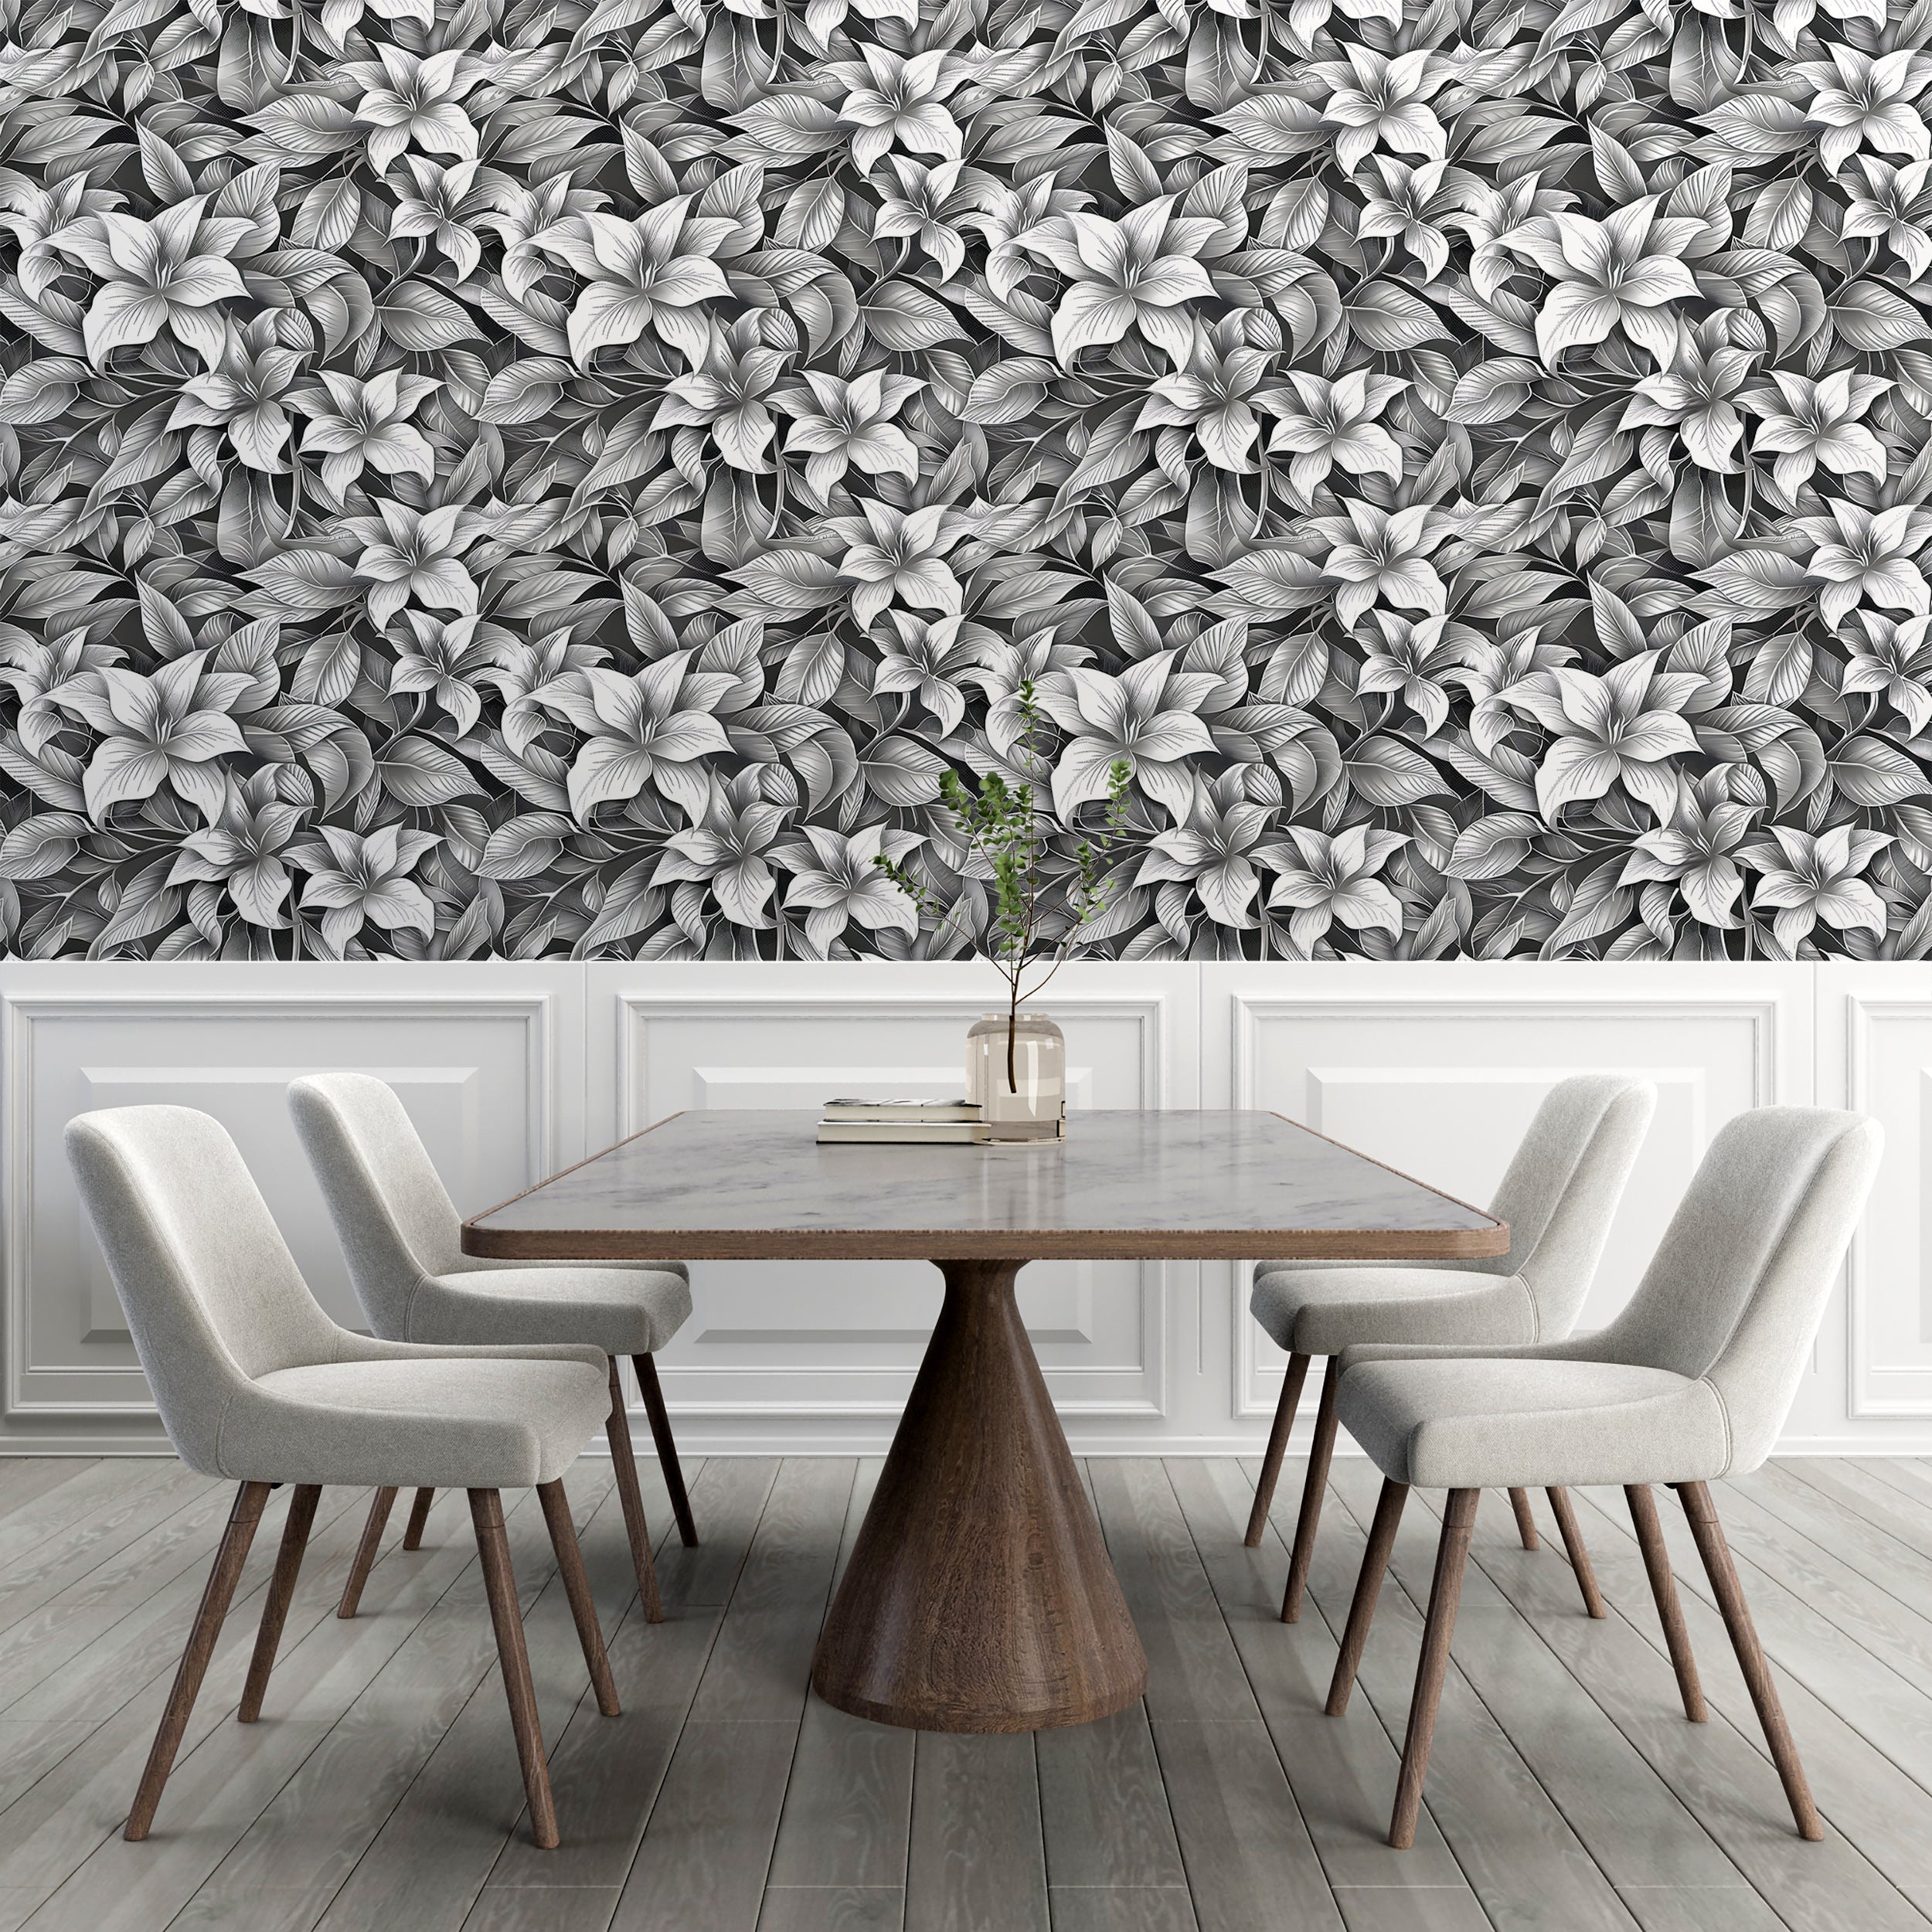 Stippling Style Floral Wallpaper, Peel and Stick Monochrome Flowers Decal, Black and White Floral Wallpaper, Removable Flower Pattern